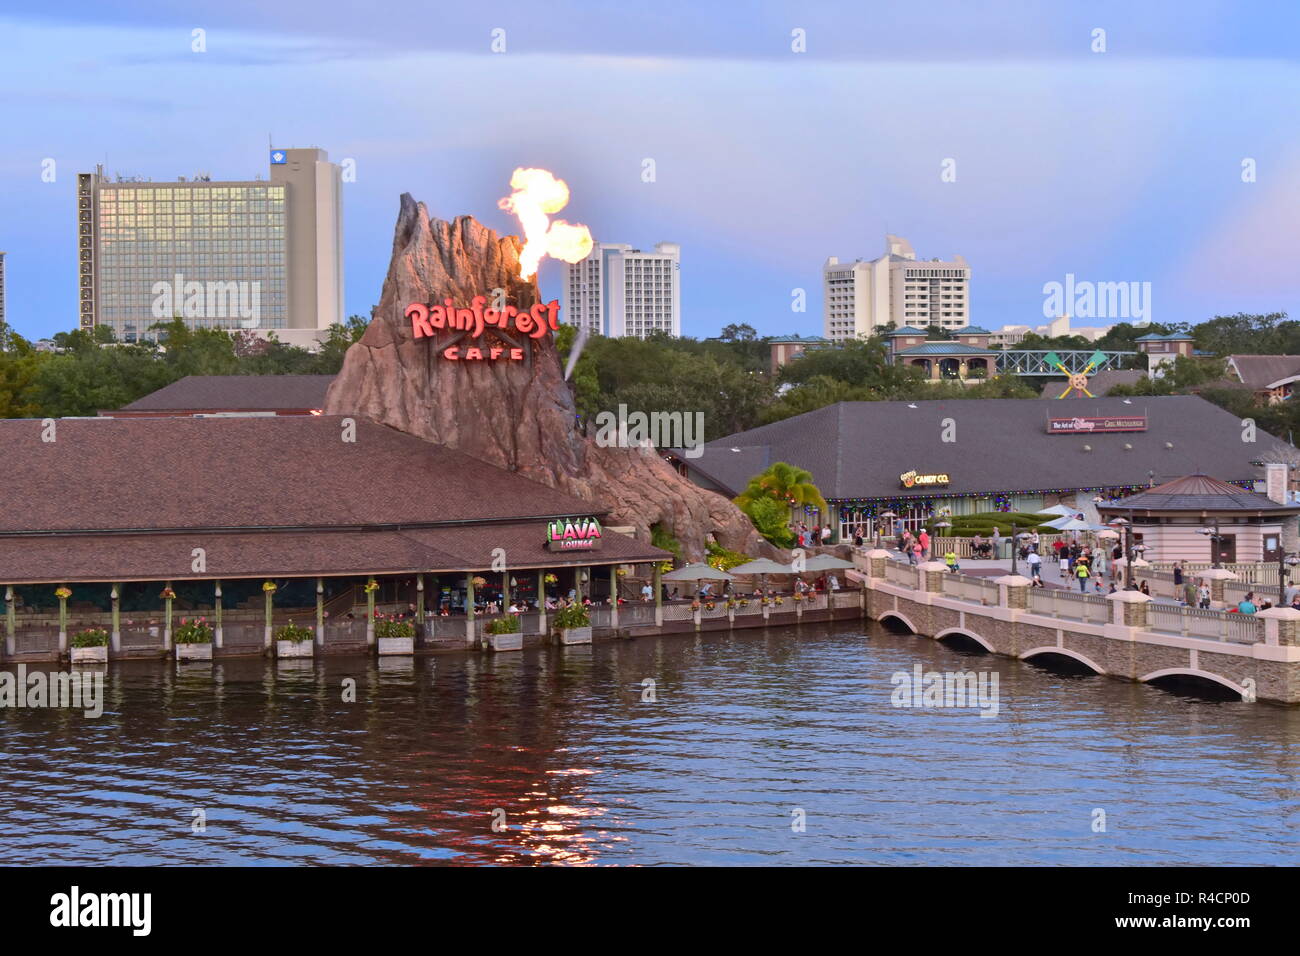 Orlando, Florida. November 18, 2018 Beautiful scenery of Volcano with flare of fire, vintage bridge, hotels and outside market . Stock Photo